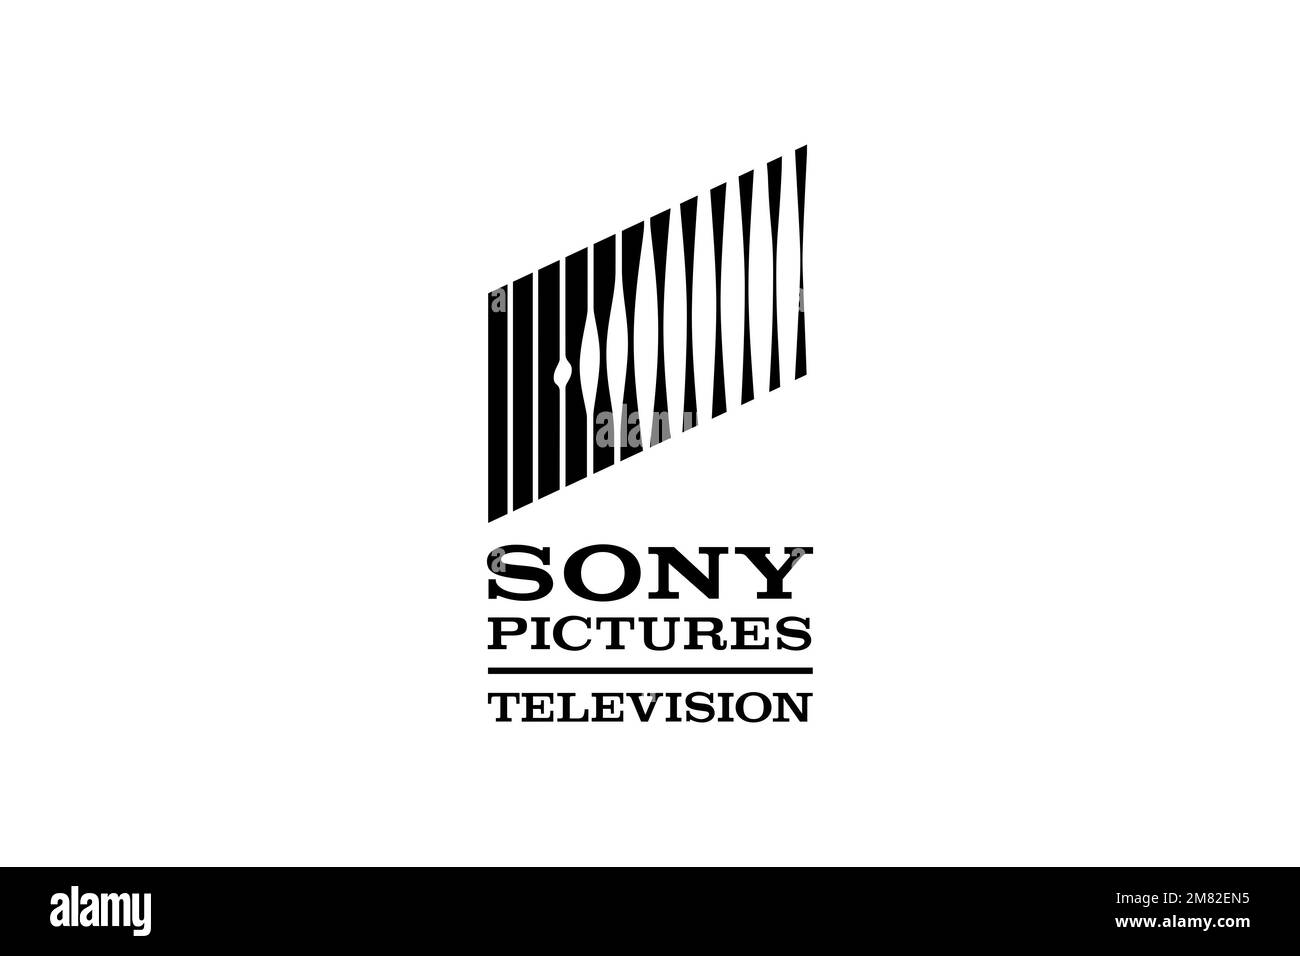 Sony Pictures Television, logo, fond blanc Banque D'Images